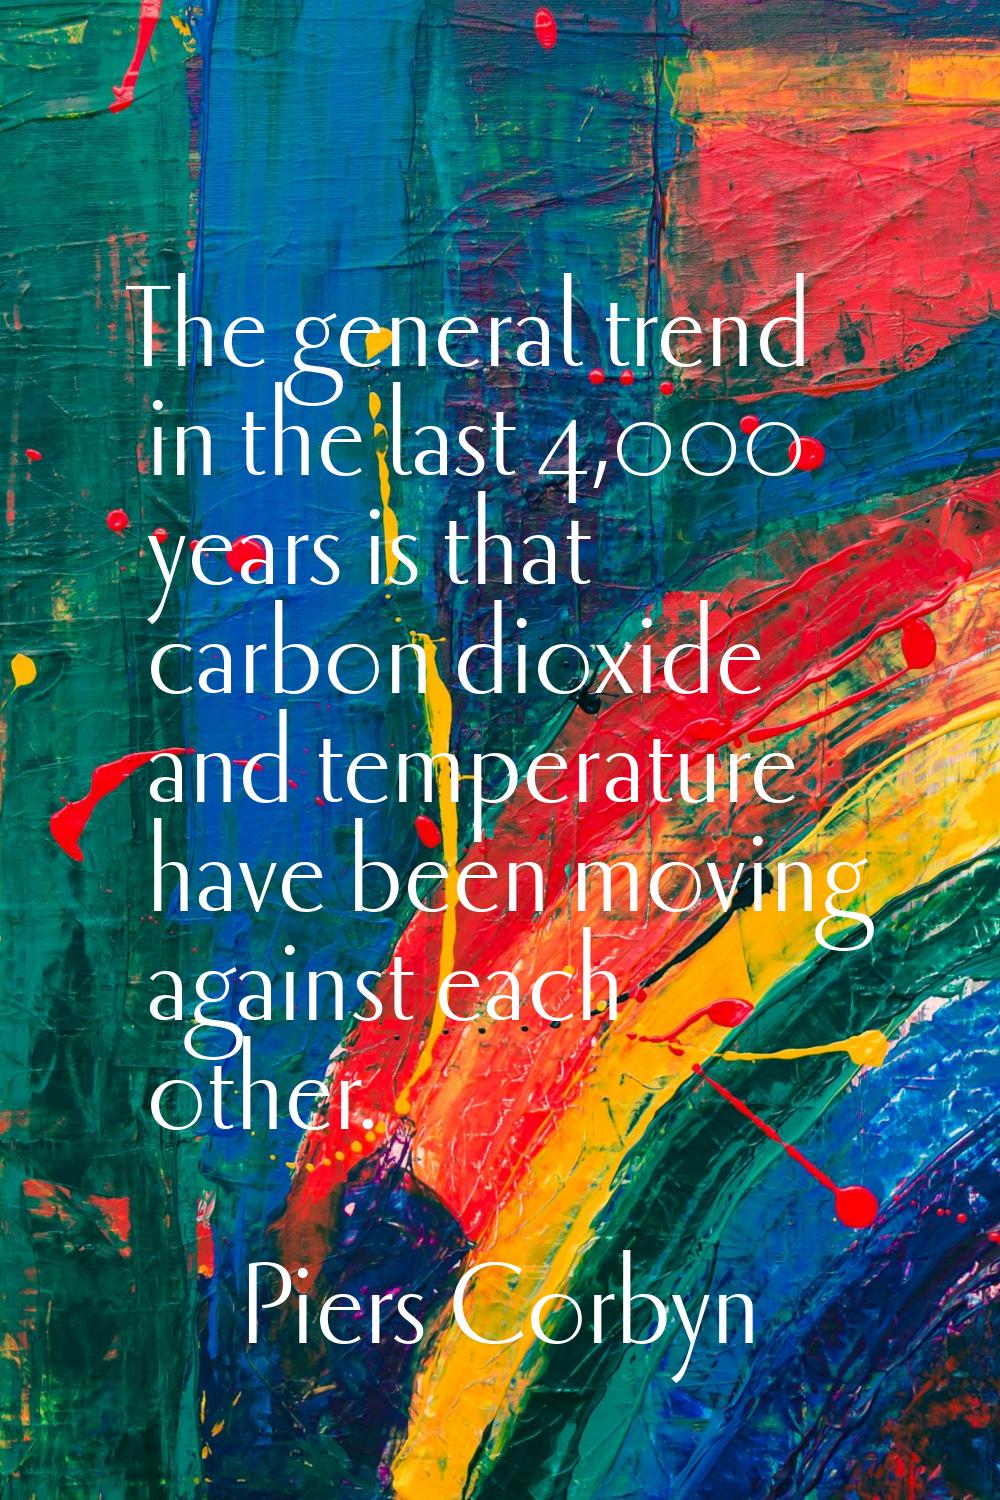 The general trend in the last 4,000 years is that carbon dioxide and temperature have been moving a